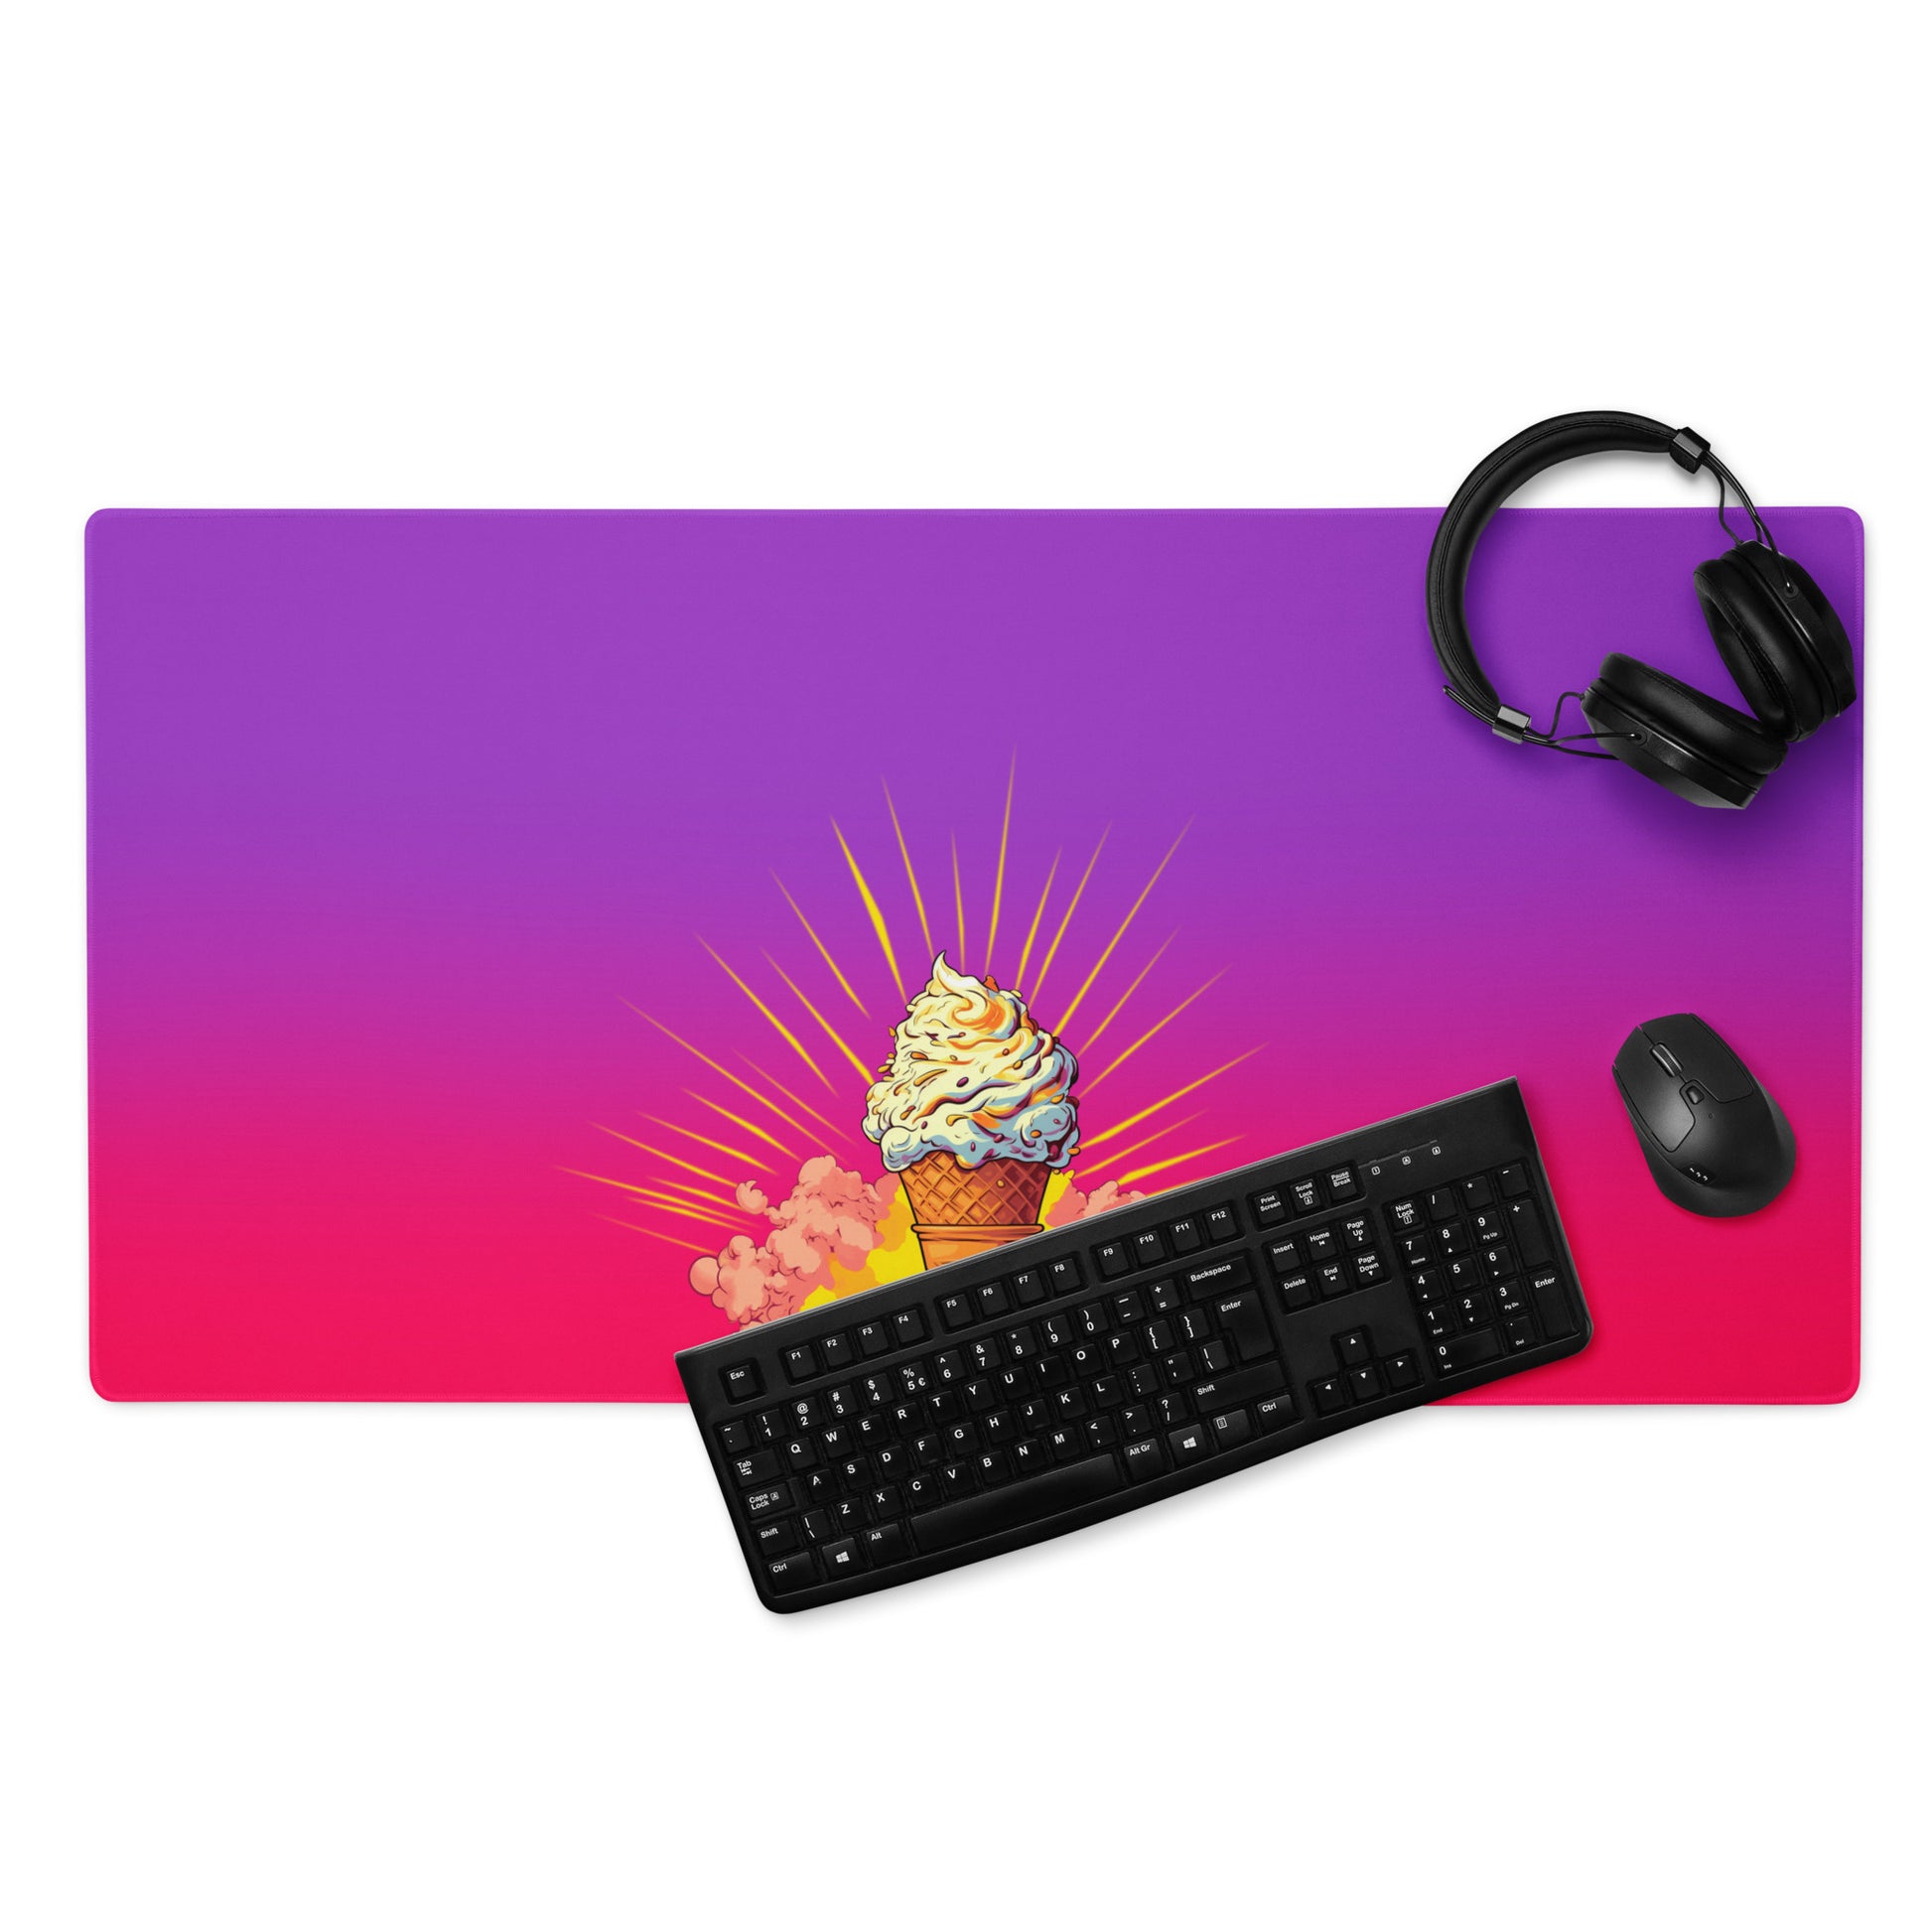 A 36" x 18" desk pad with a brightly colored ice cream cone in the middle of it displayed with a keyboard, headphones and a mouse. Pink and purple in color.